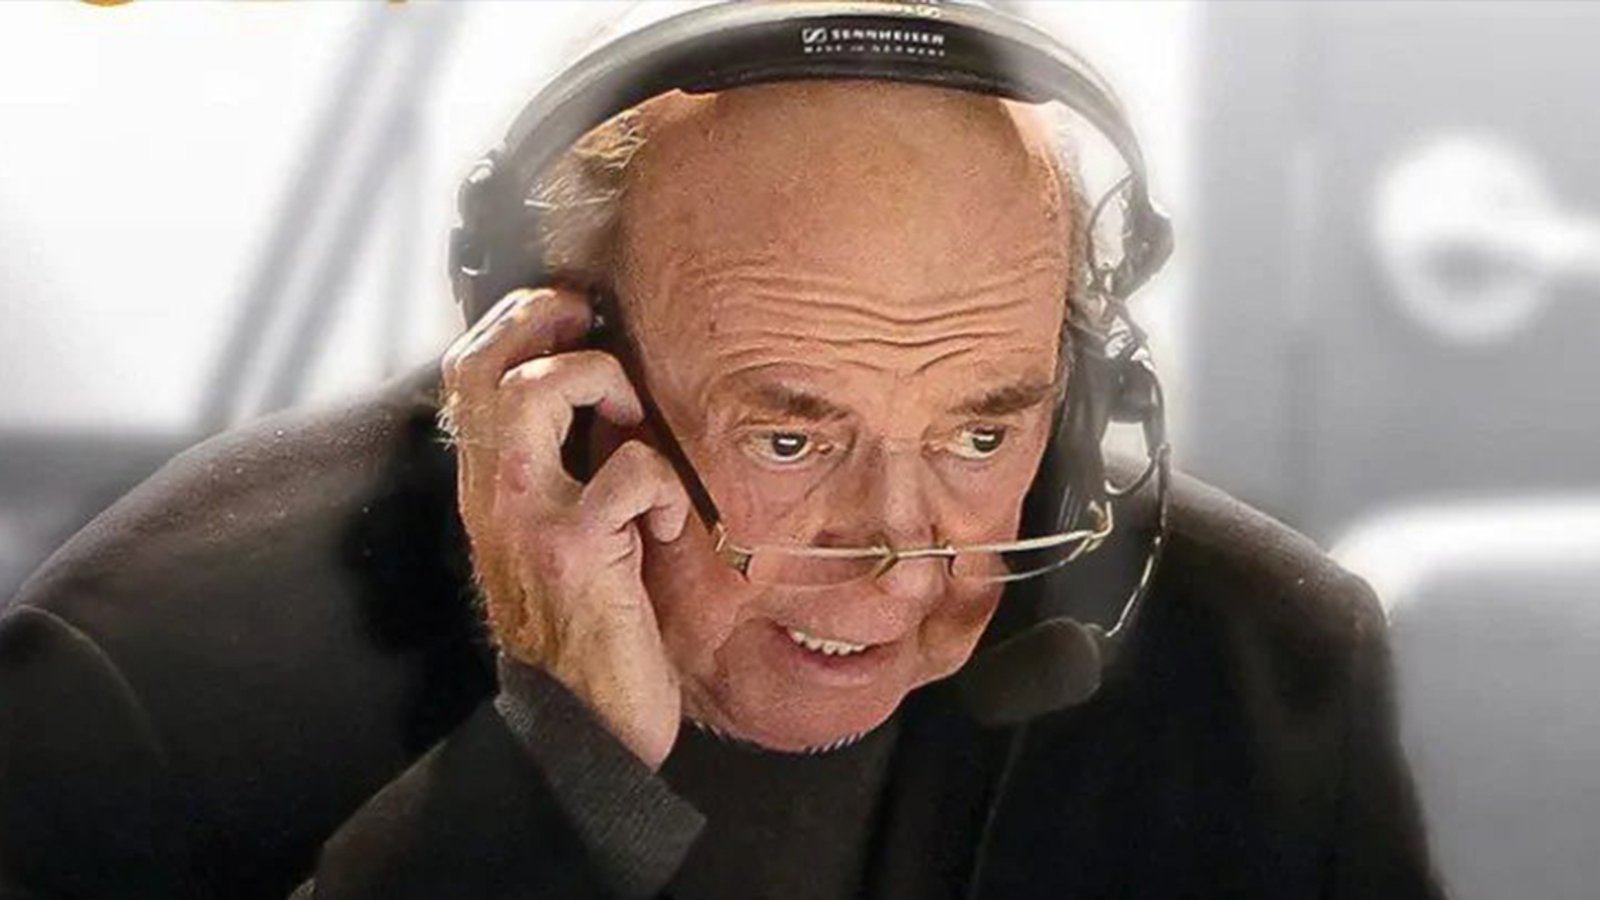 Leafs plan special ceremony for Bob Cole’s final broadcast in Toronto tonight